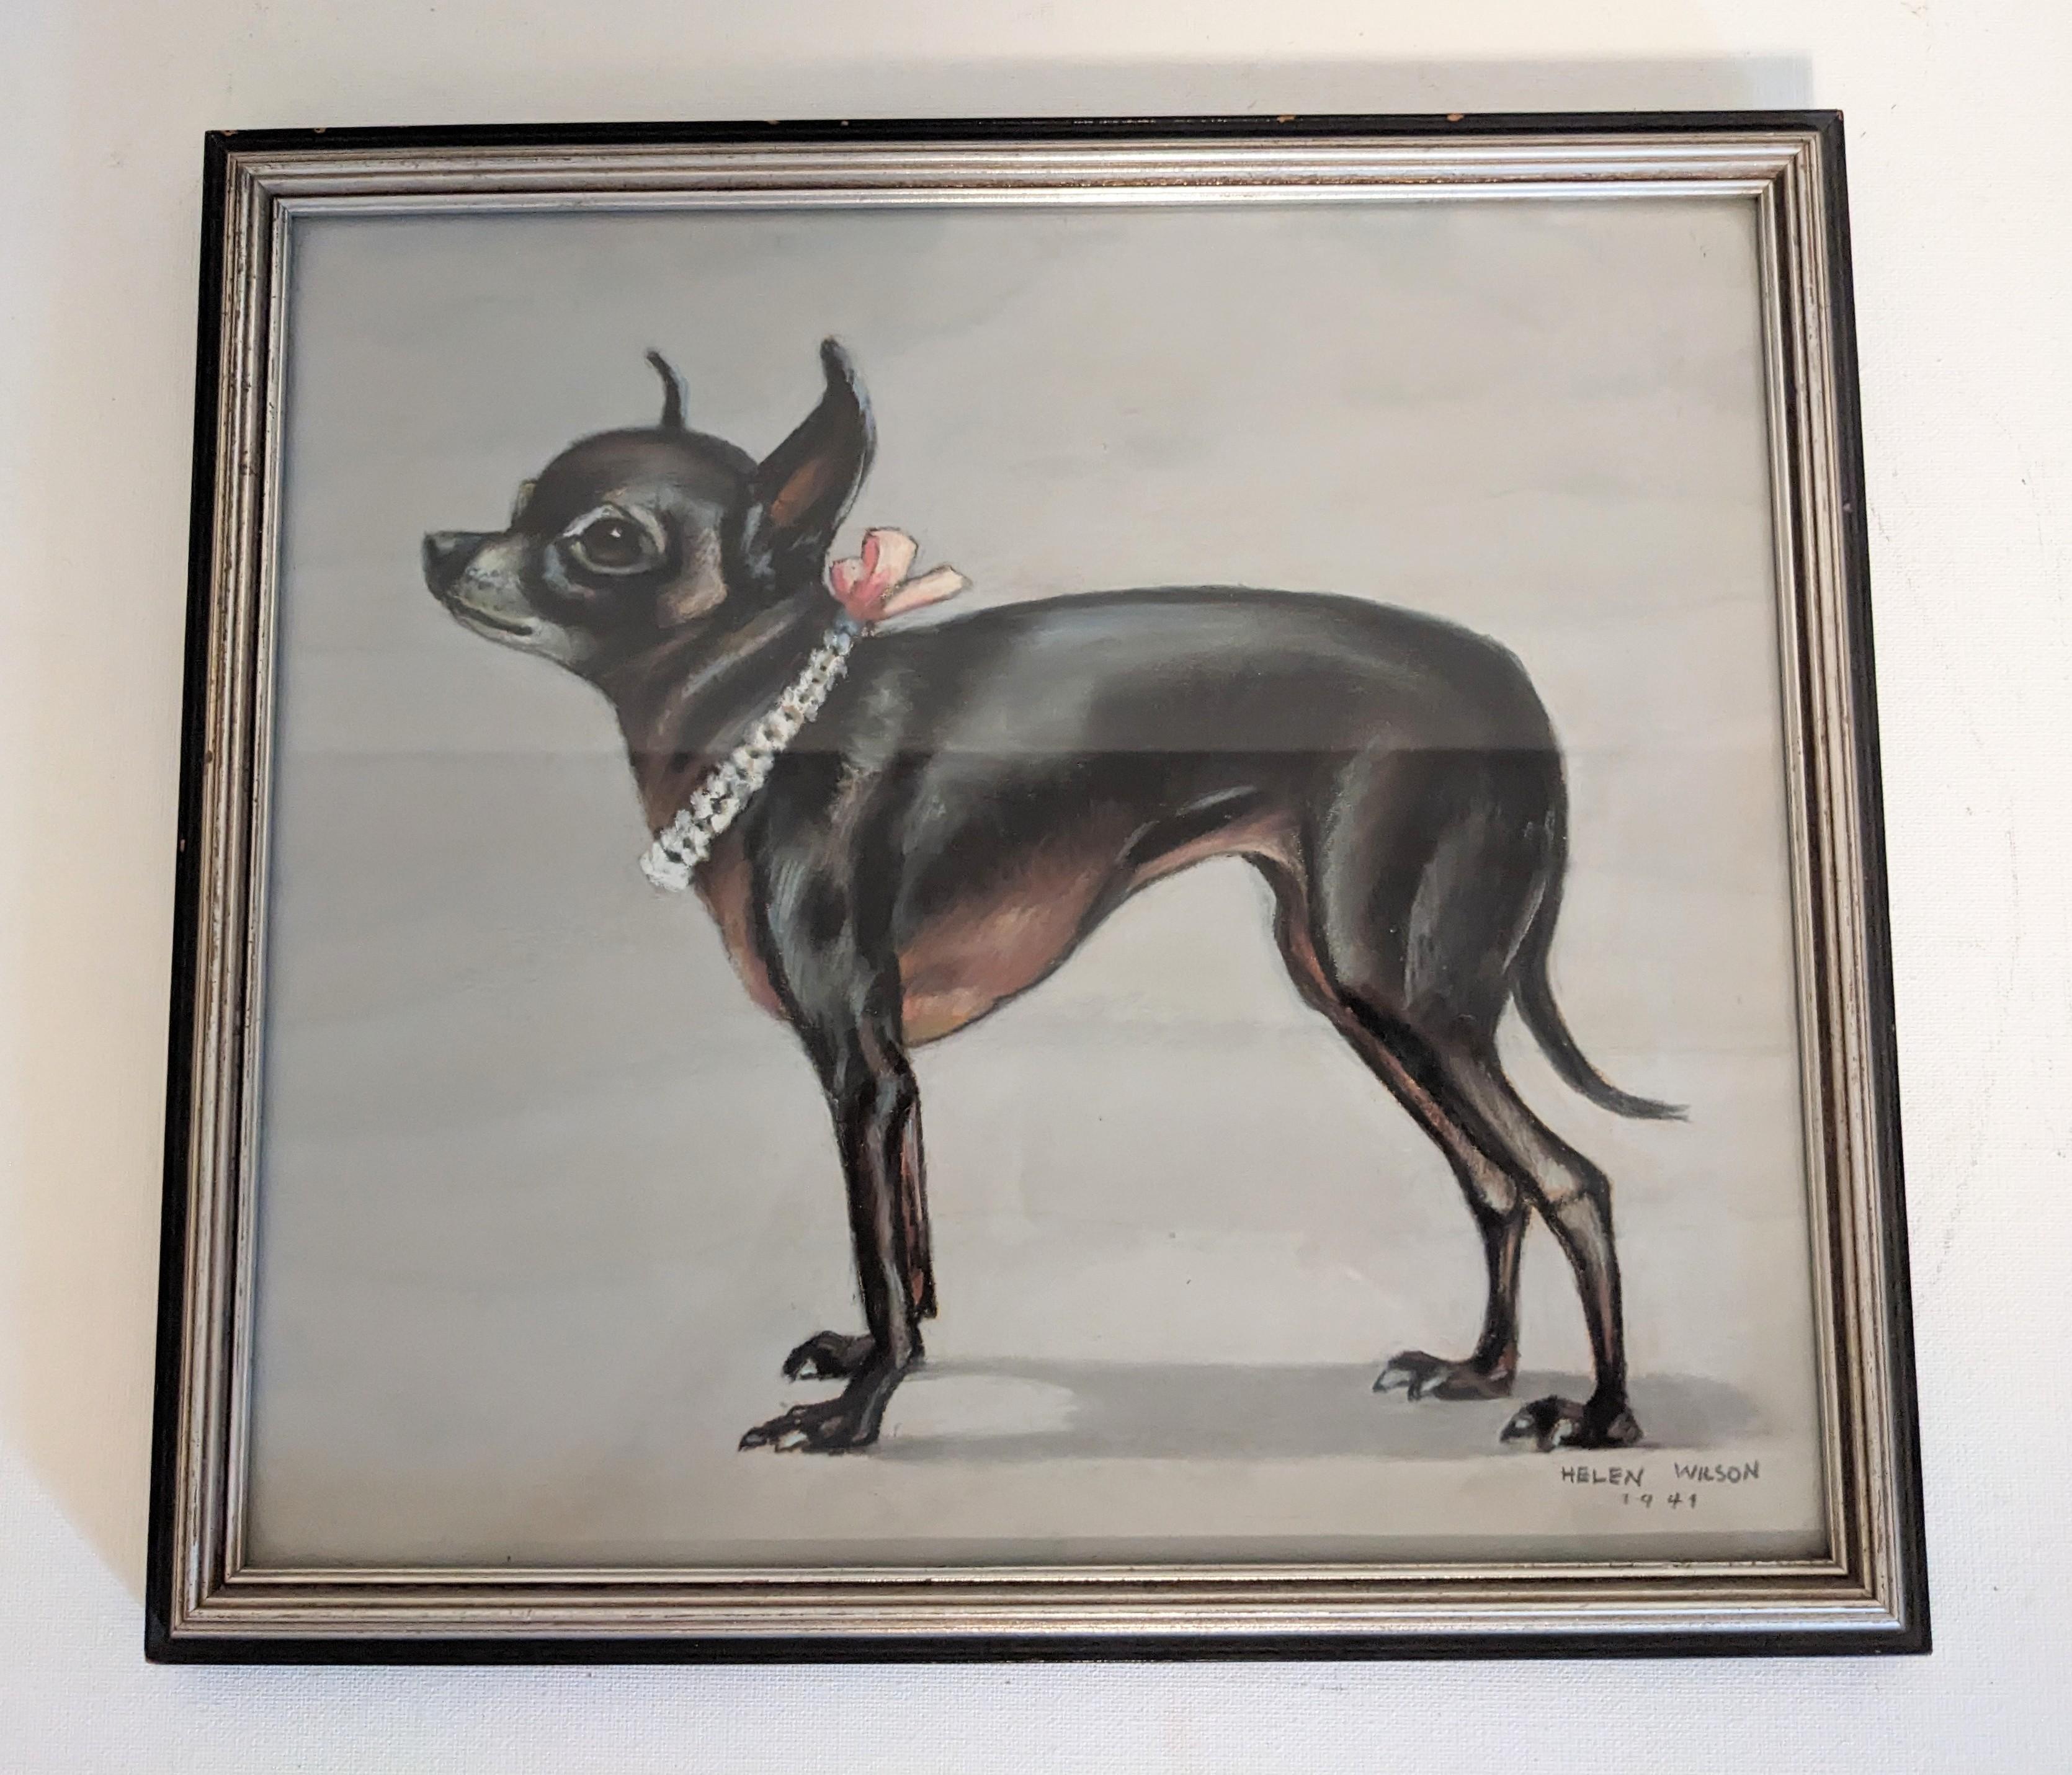 Charming Mid Century Chihuahua Painting with wood frame in silver gilt and black. The frenetic nervousness of this breed is captured as this pup does not seem so happy with this sitting. Signed Helen Wilson 1941. Size: 12